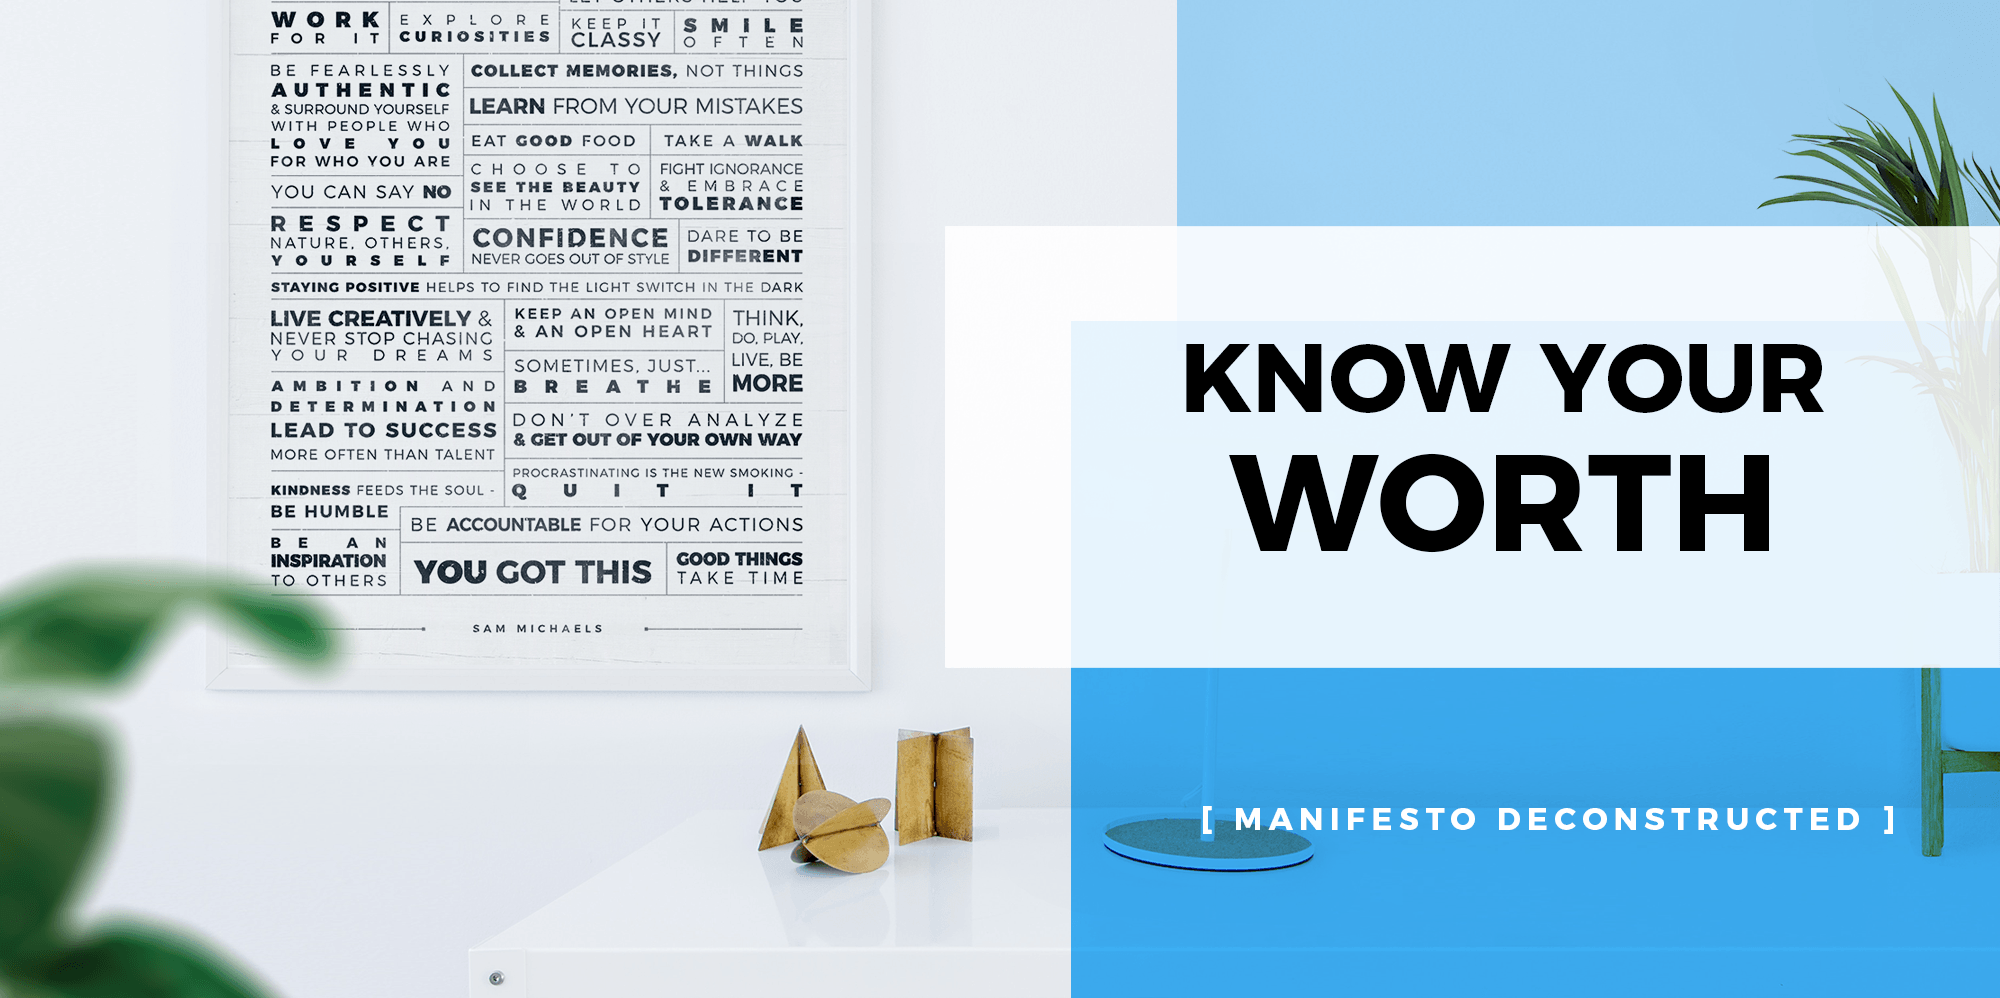 Know Your Worth - Manifesto Deconstructed